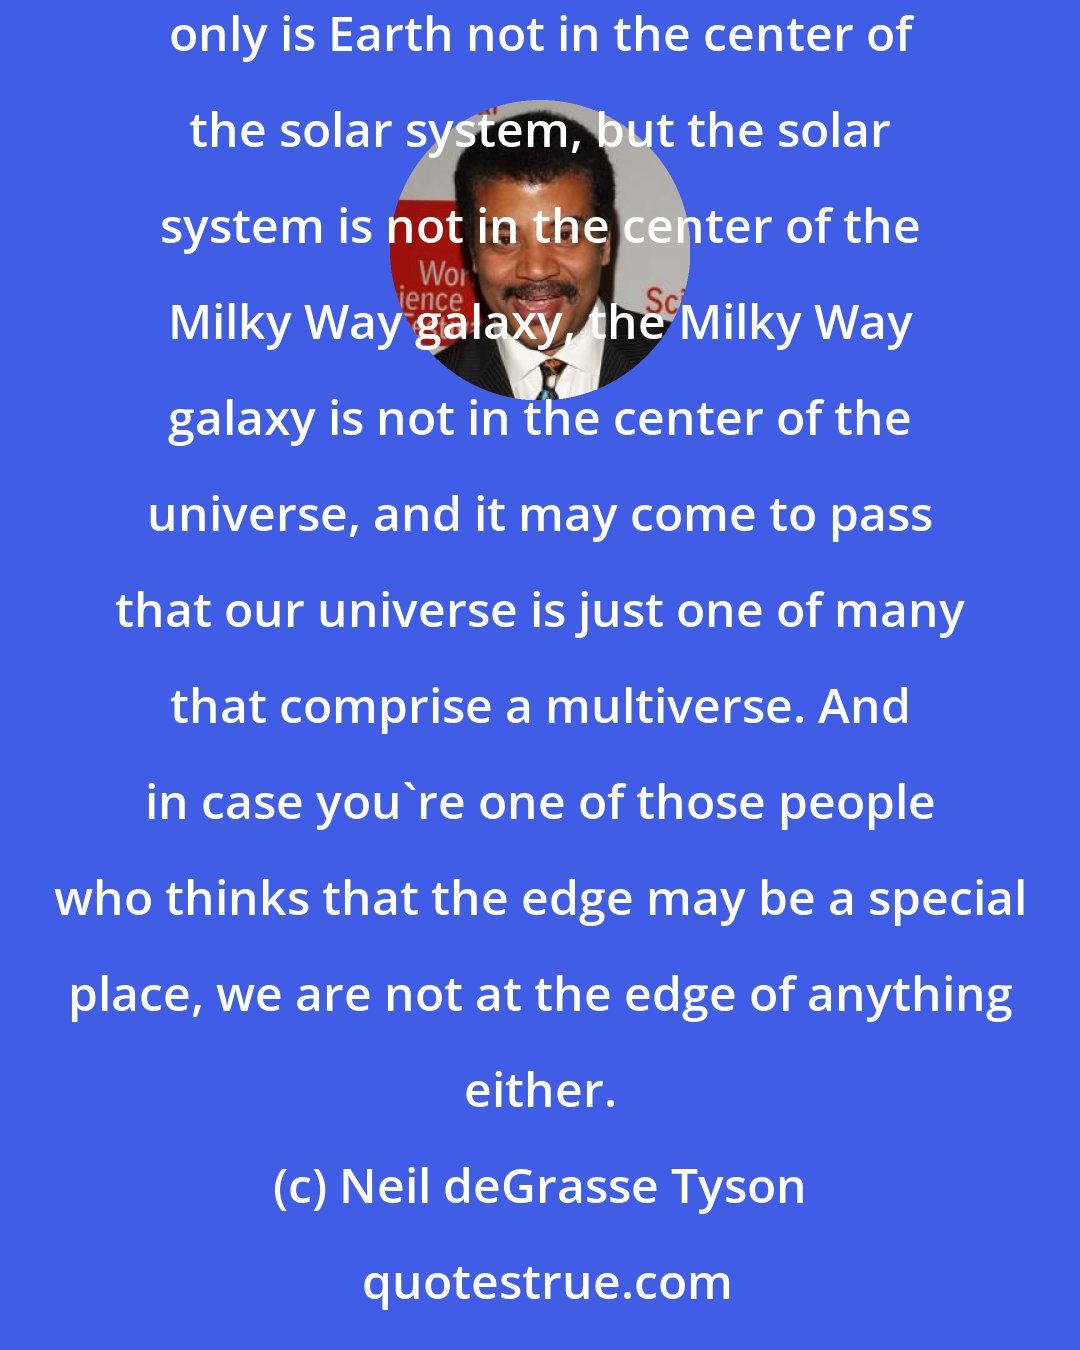 Neil deGrasse Tyson: While the Copernican principle comes with no guarantees that it will forever guide us to cosmic truths, it's worked quite well so far: not only is Earth not in the center of the solar system, but the solar system is not in the center of the Milky Way galaxy, the Milky Way galaxy is not in the center of the universe, and it may come to pass that our universe is just one of many that comprise a multiverse. And in case you're one of those people who thinks that the edge may be a special place, we are not at the edge of anything either.